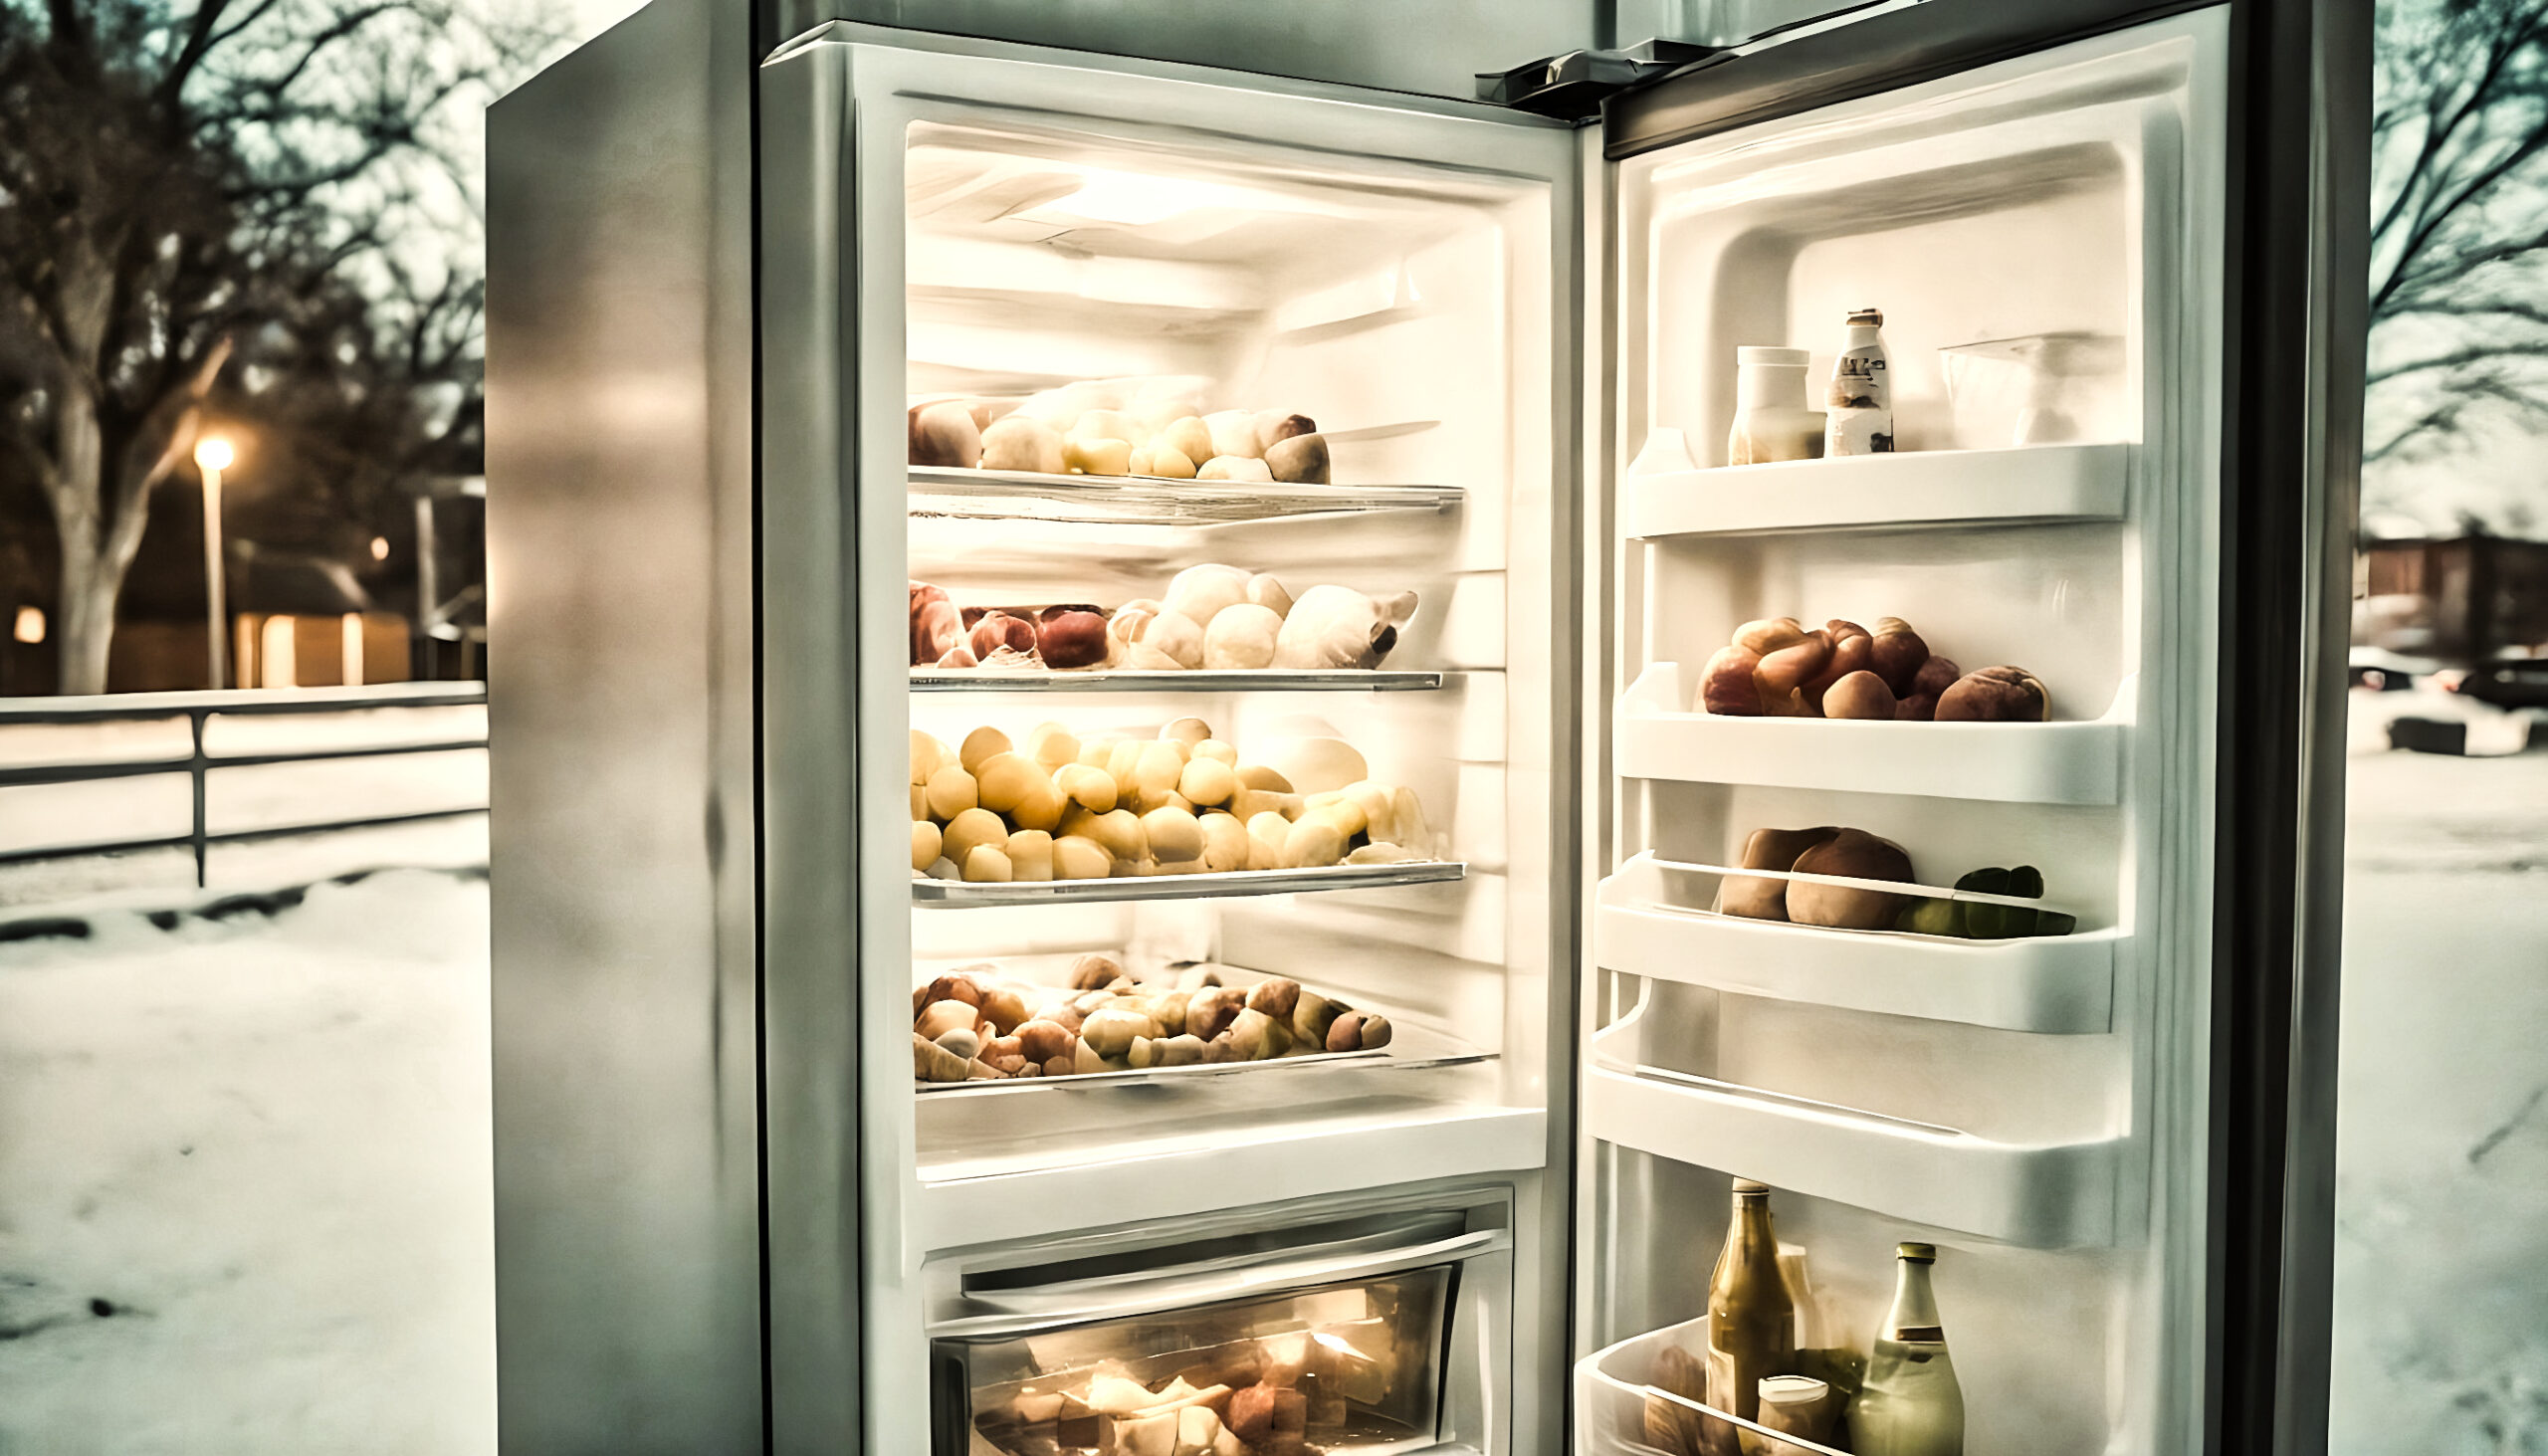 Commercial Refrigerator Maintenance and Repair Services in Pflugerville